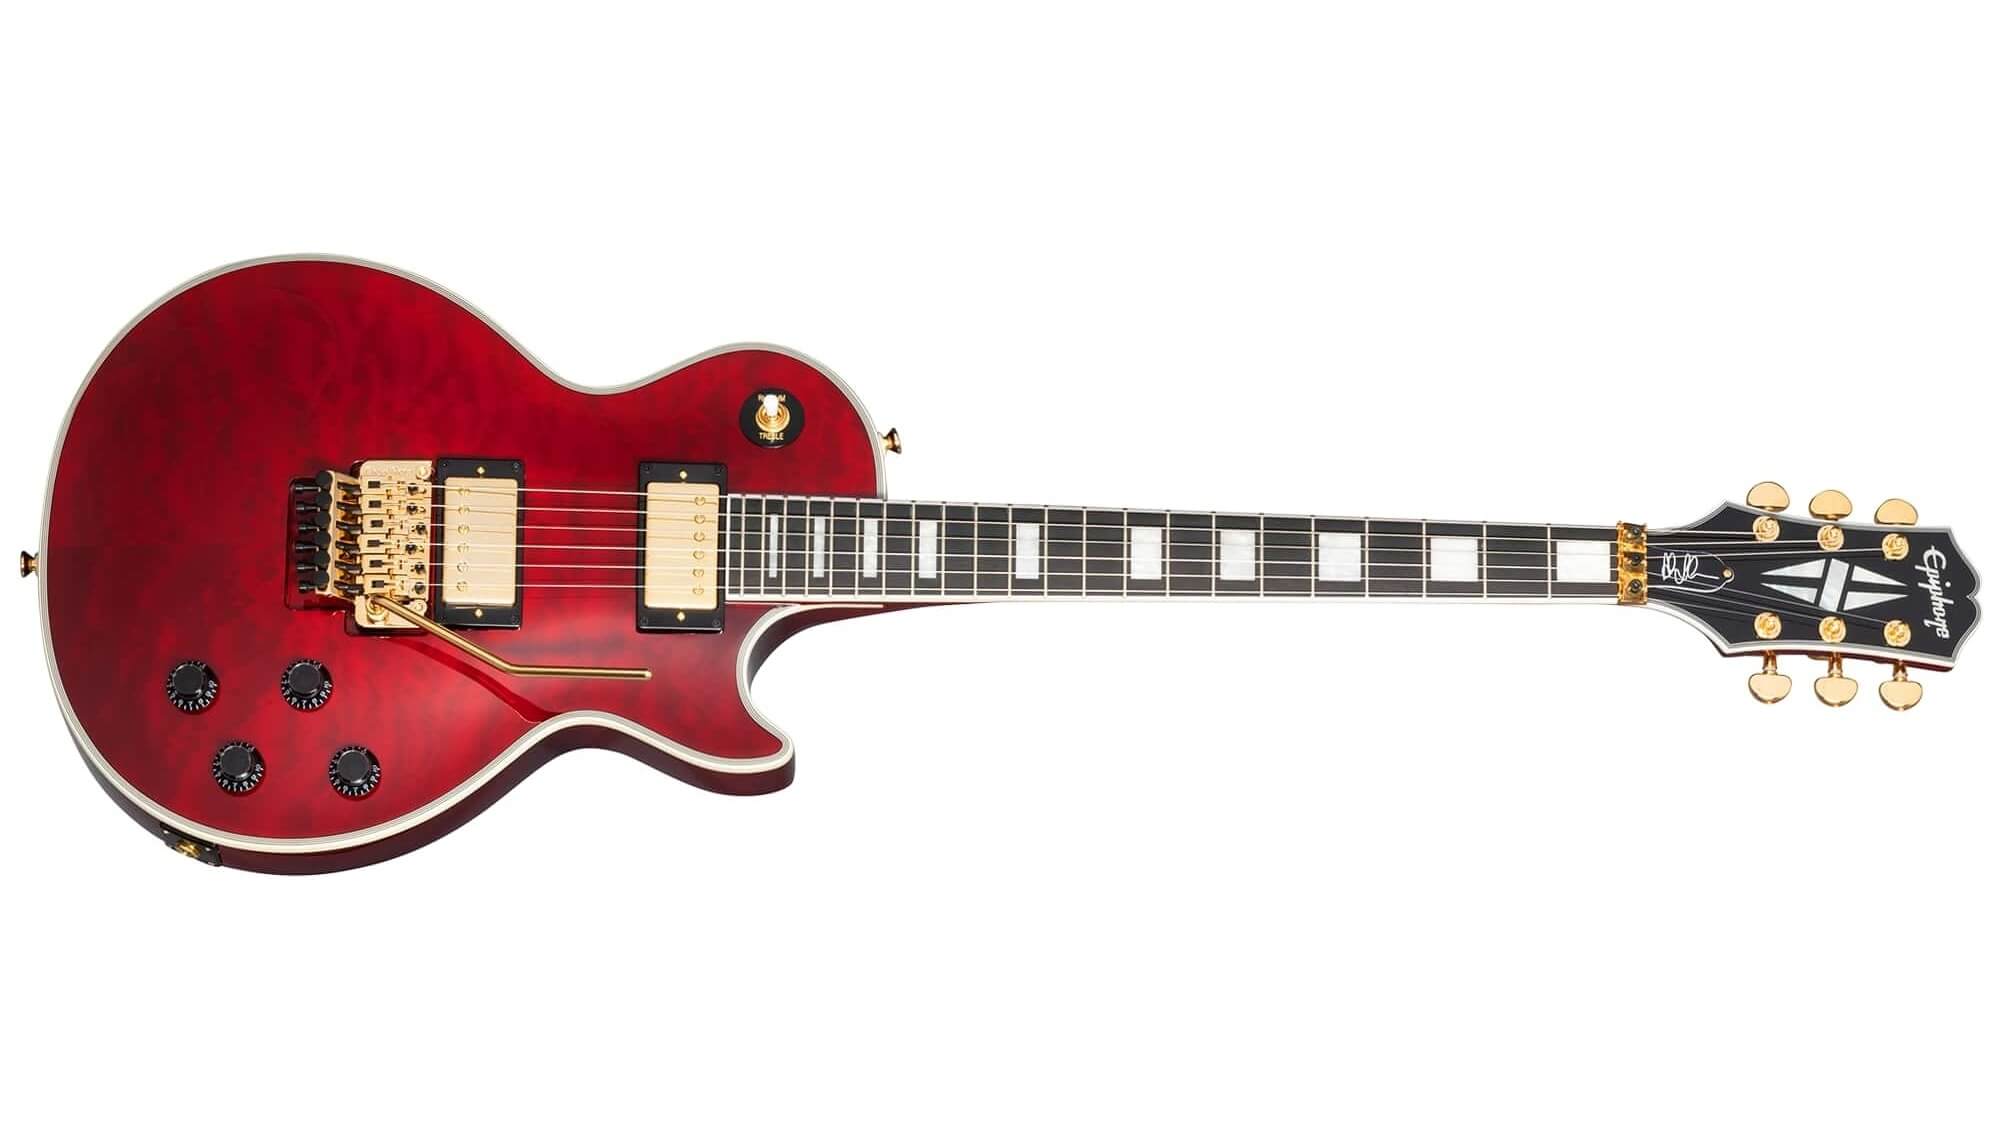 Epiphone's Alex Lifeson Les Paul Custom Axcess in Ruby